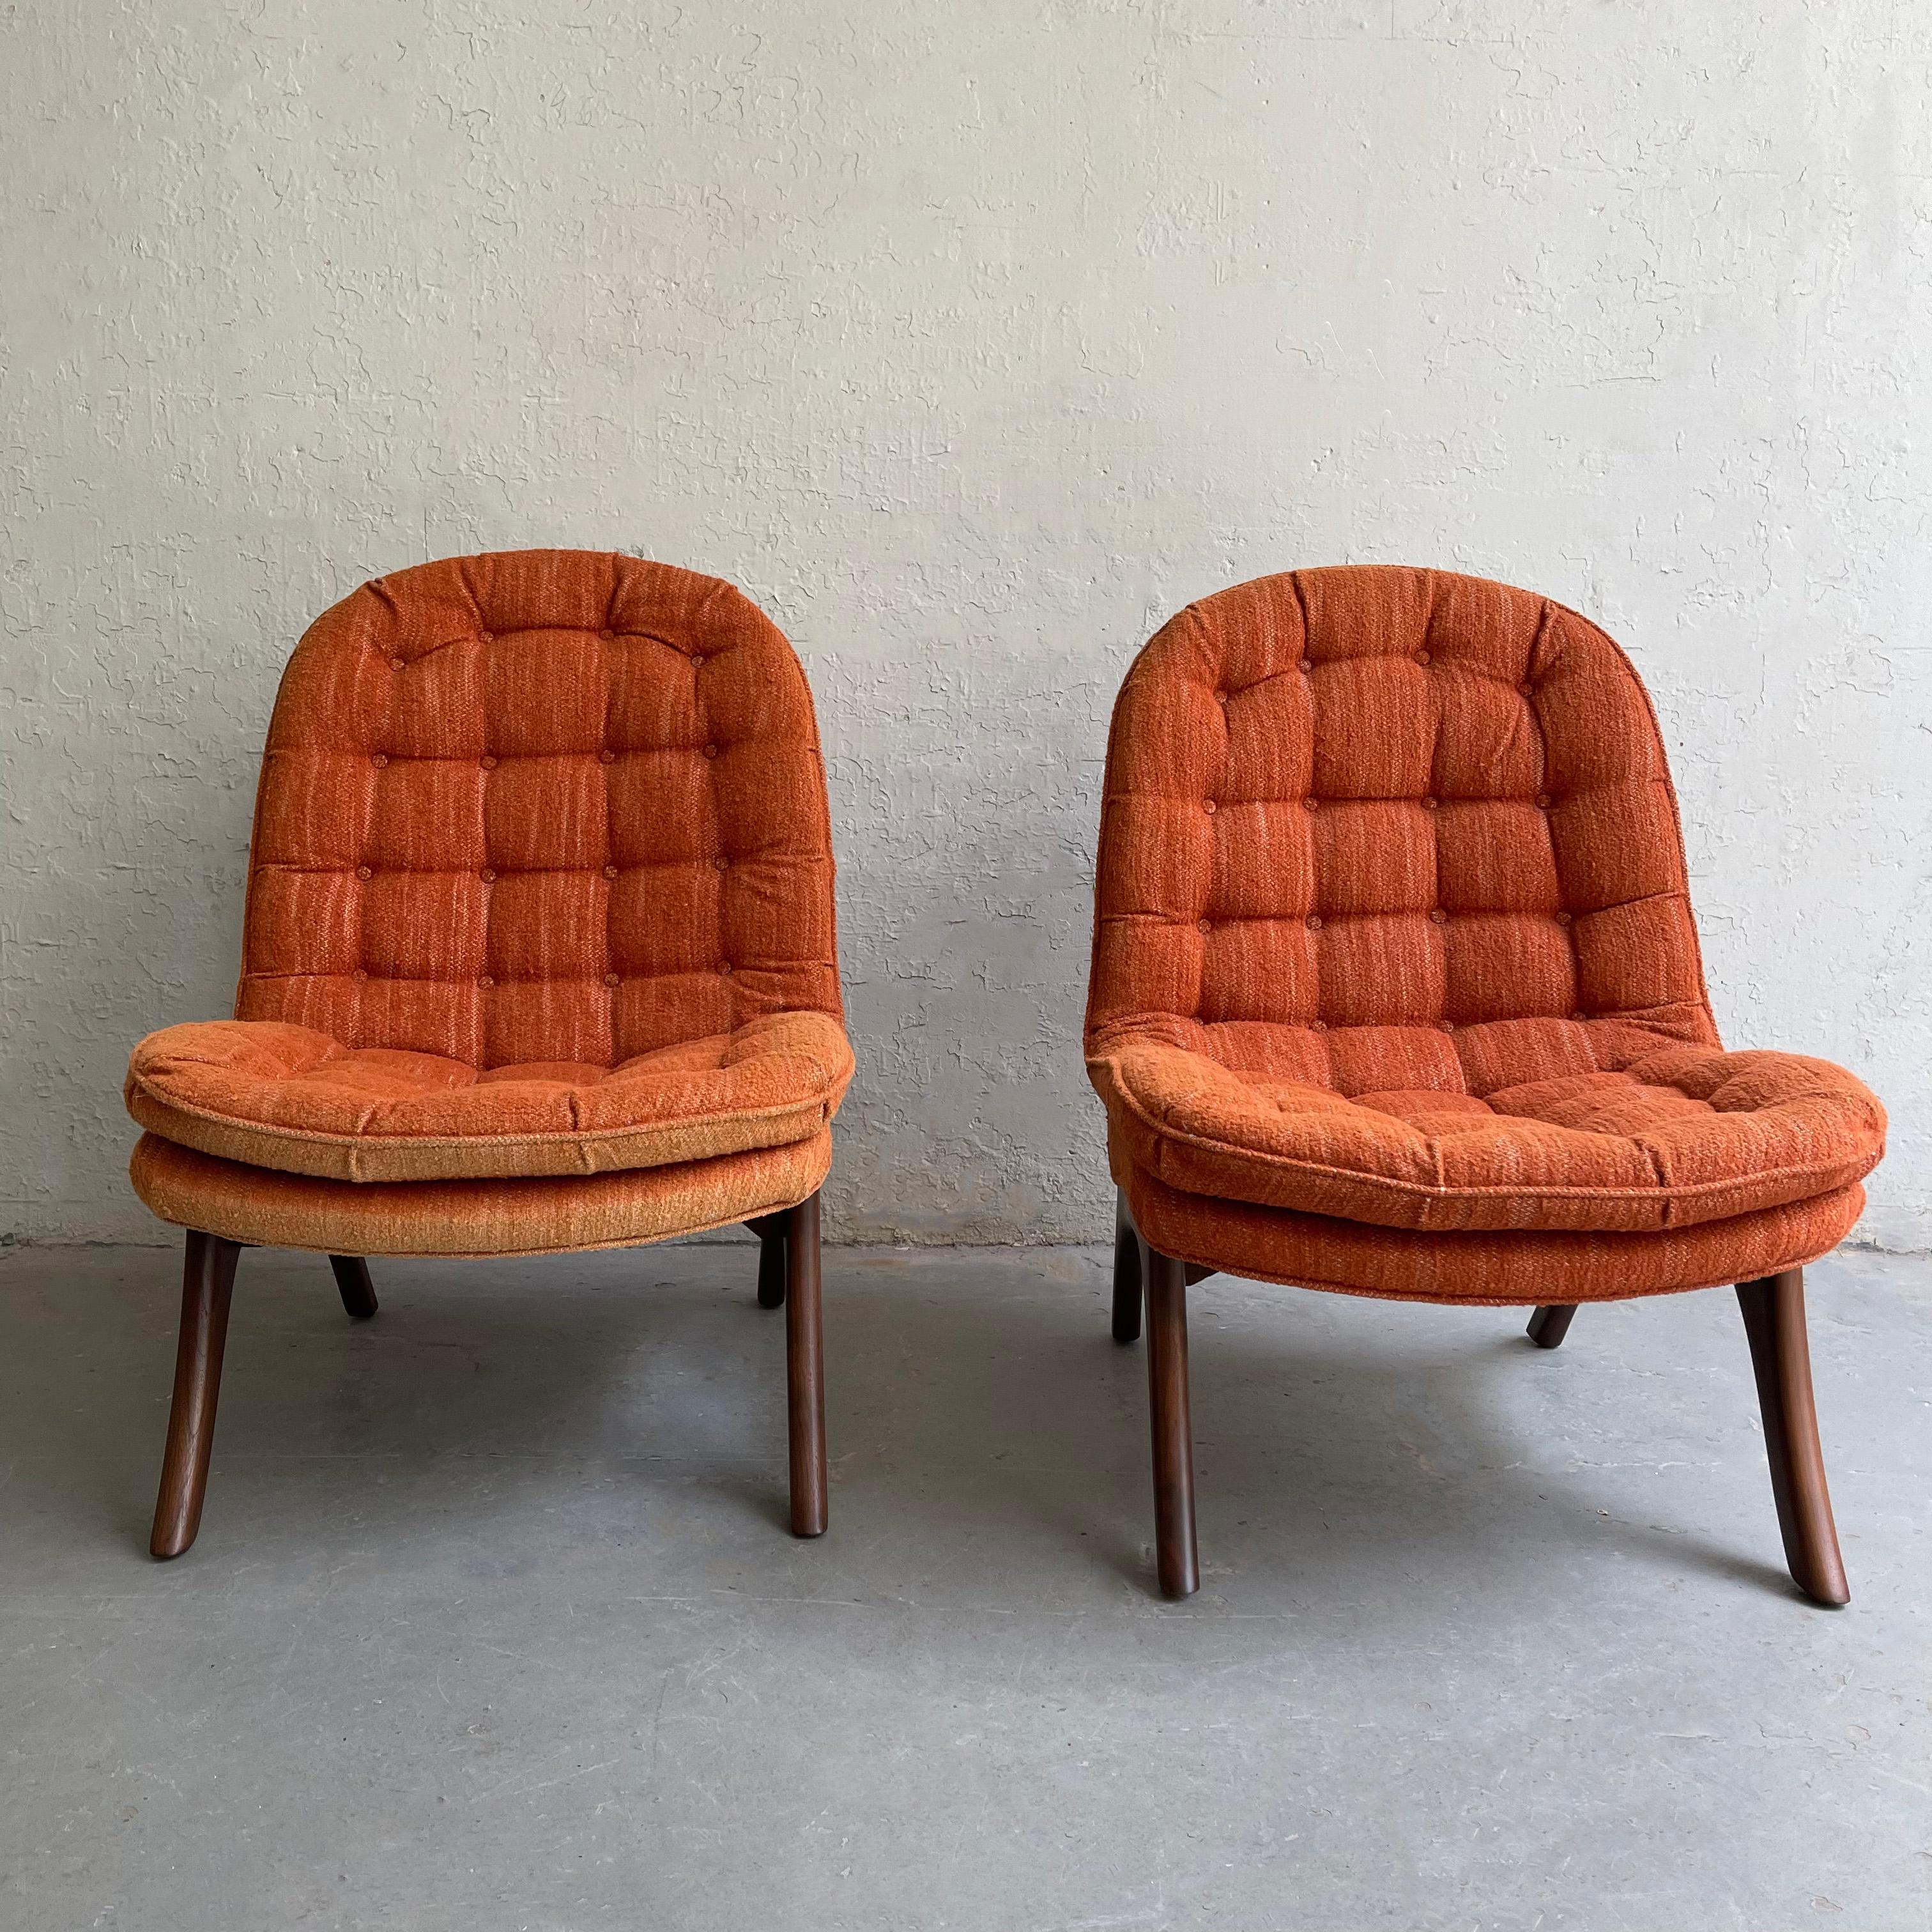 Fabric Mid-Century Modern Slipper Chairs By Adrian Pearsall For Craft Associates